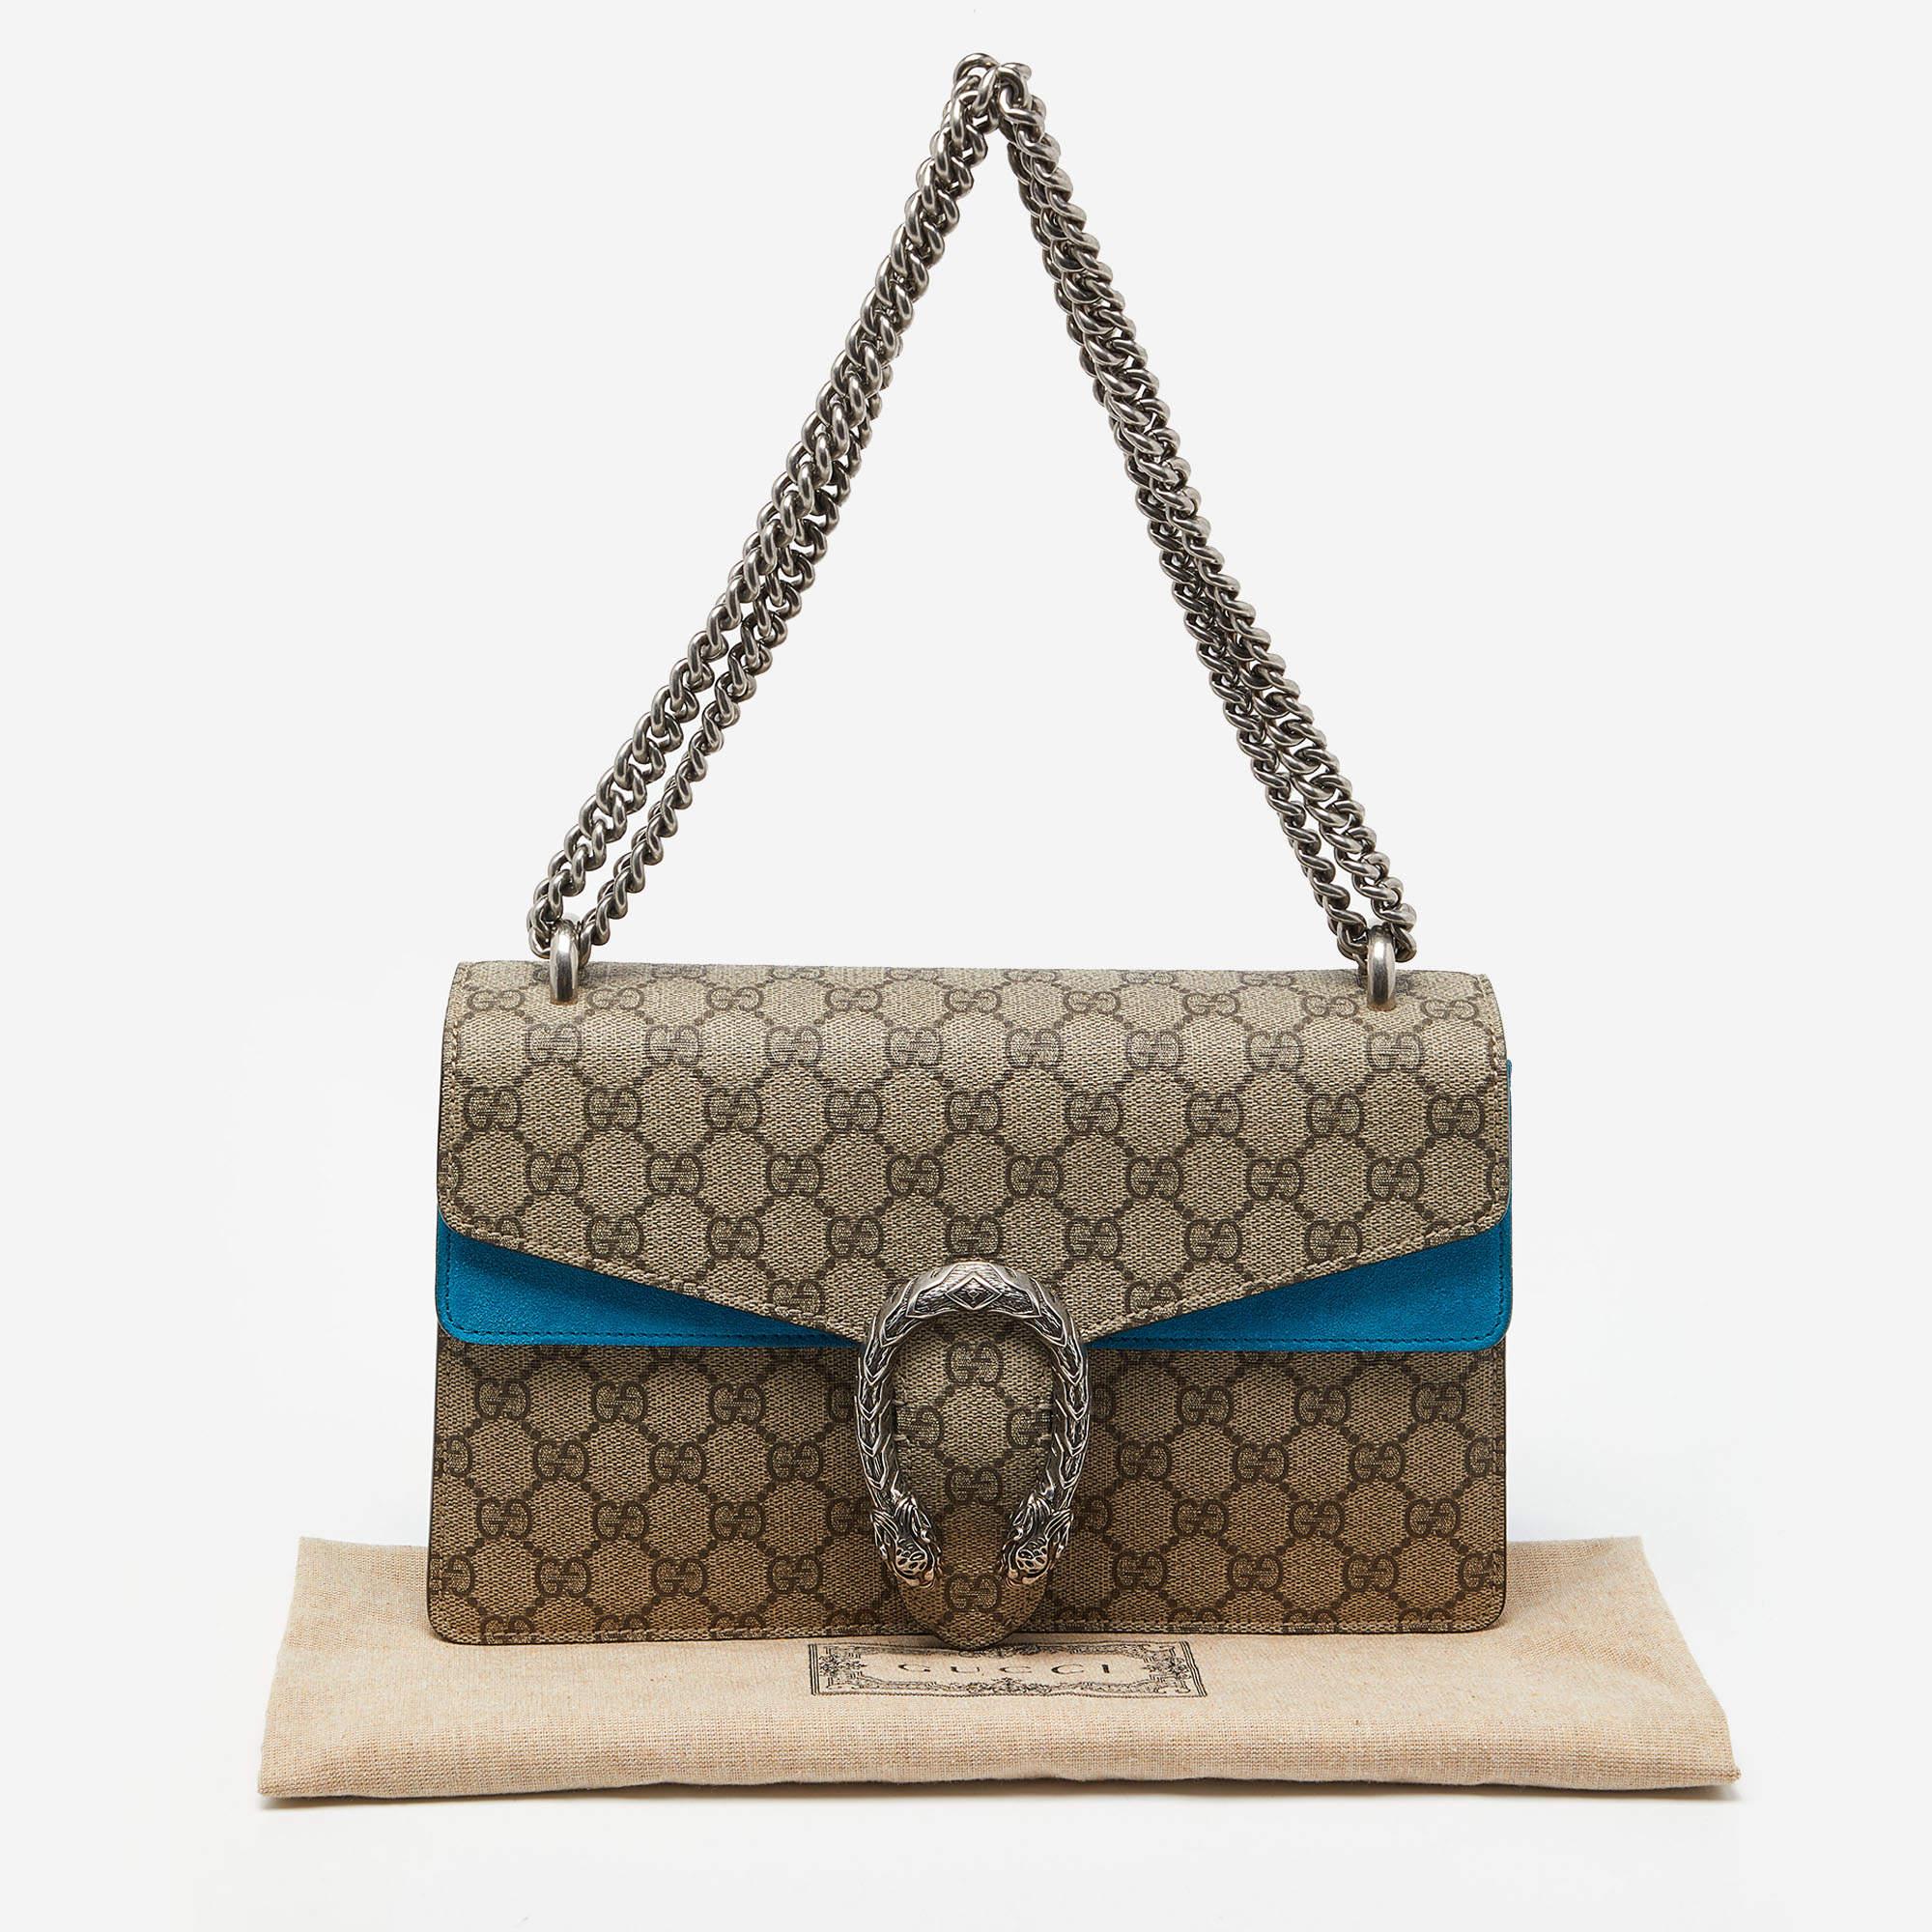 Gucci Beige/Blue GG Supreme Canvas and Suede Small Dionysus Shoulder Bag For Sale 9